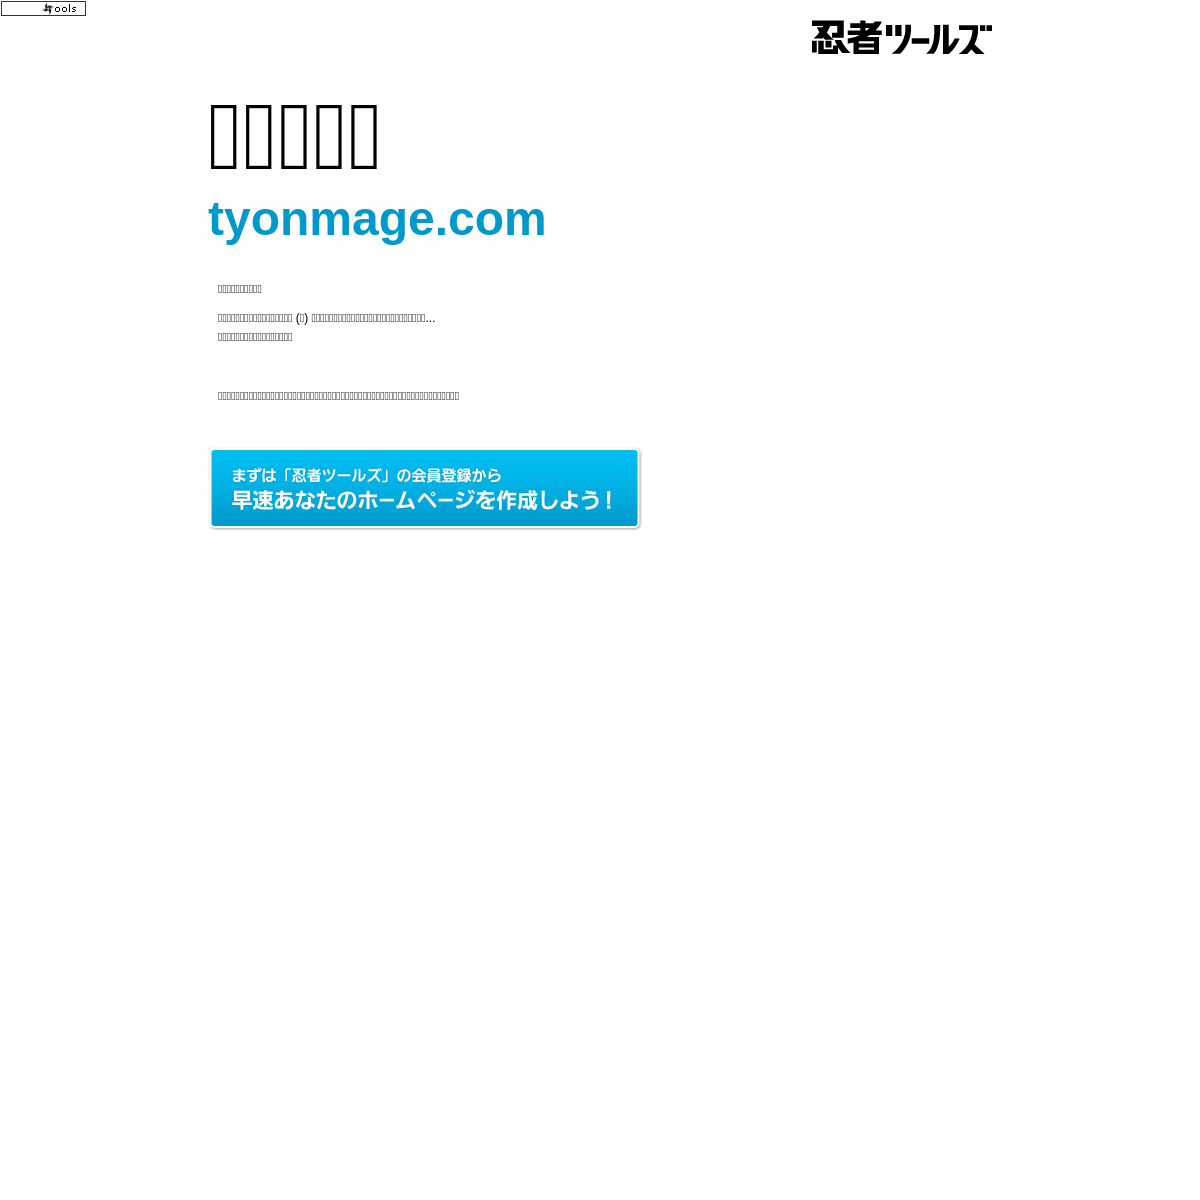 A complete backup of tyonmage.com